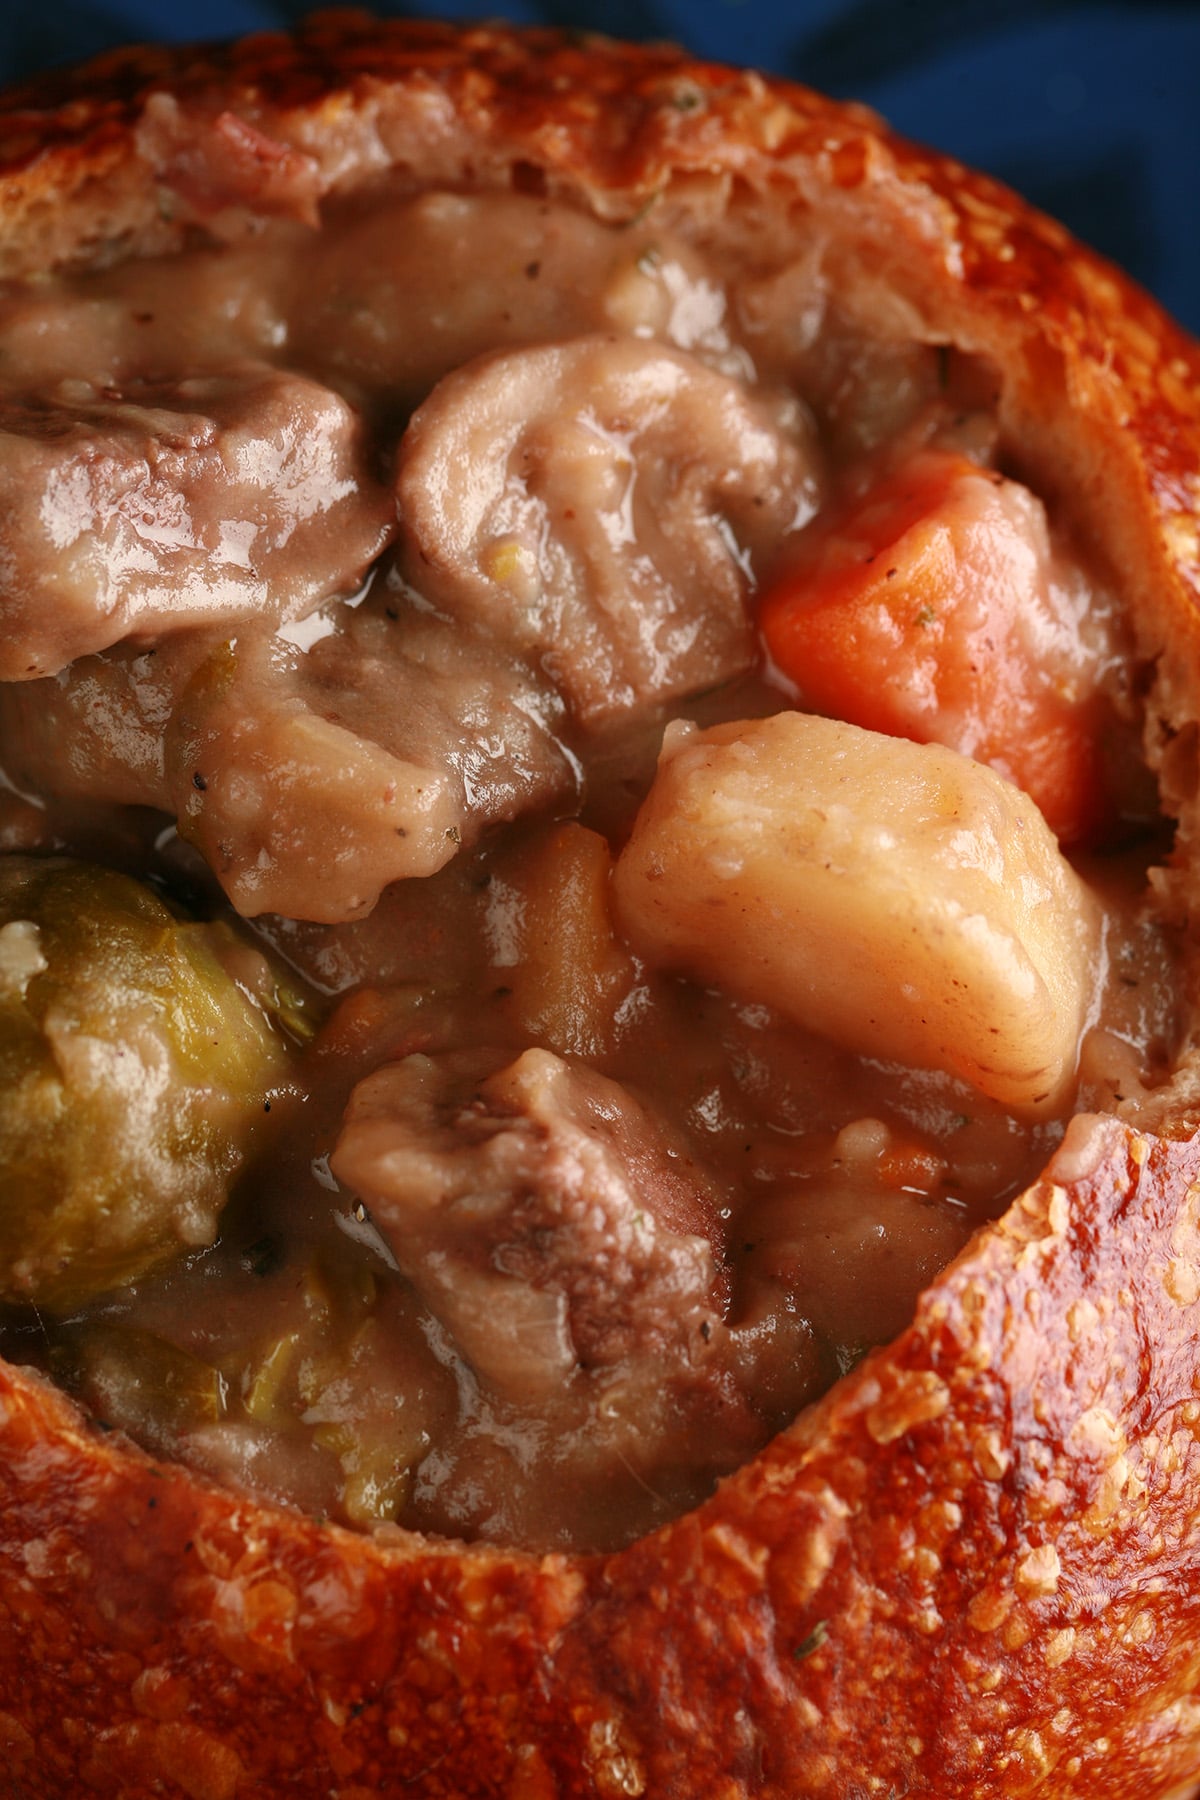 A bread bowl full of hearty beef stew. Chunks of beef, carrots, and potatoes are prominent.